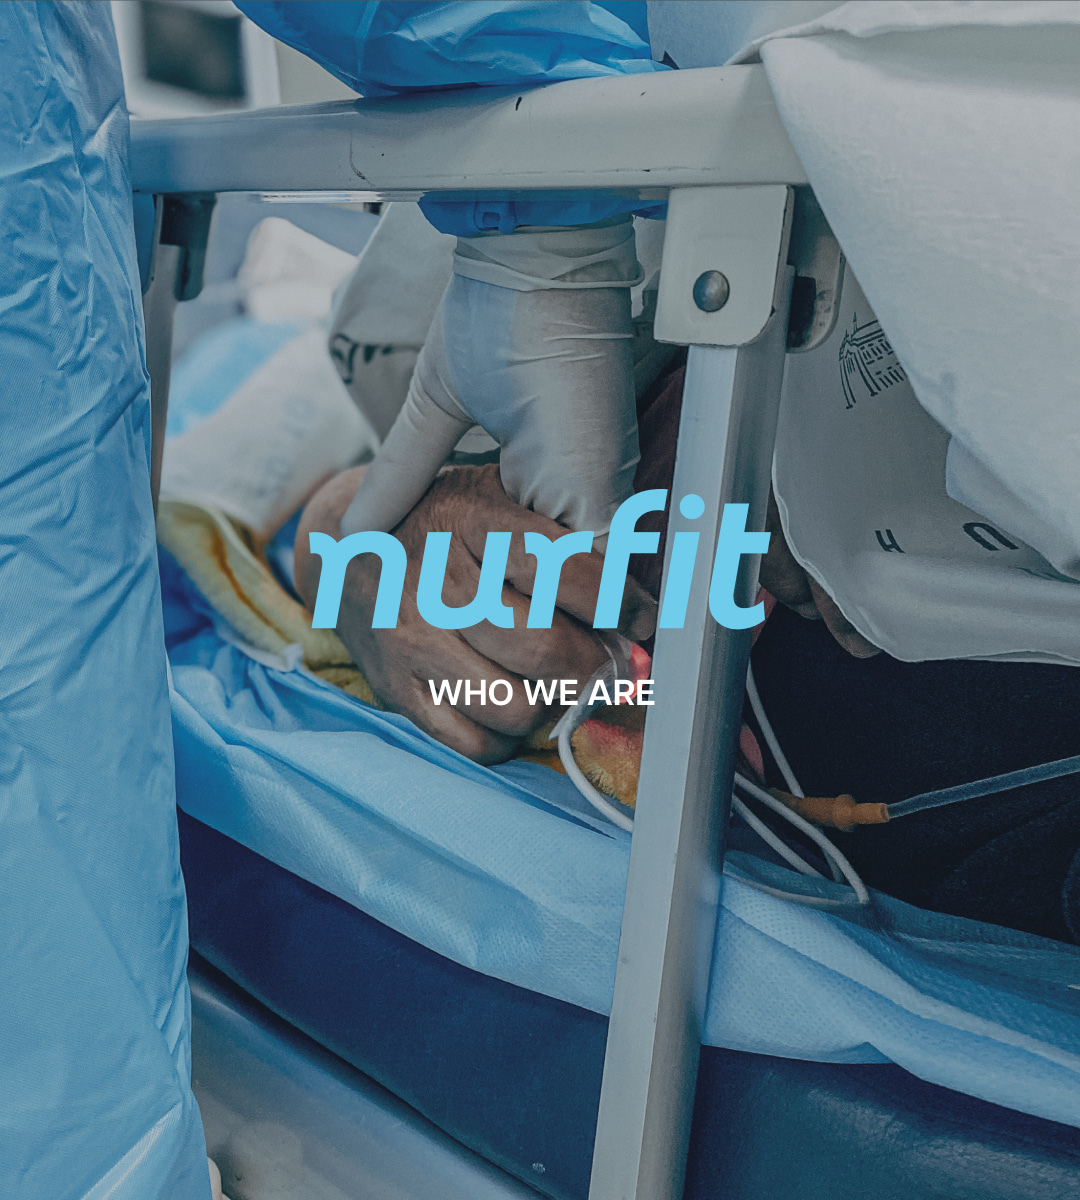 nurfit, who we are